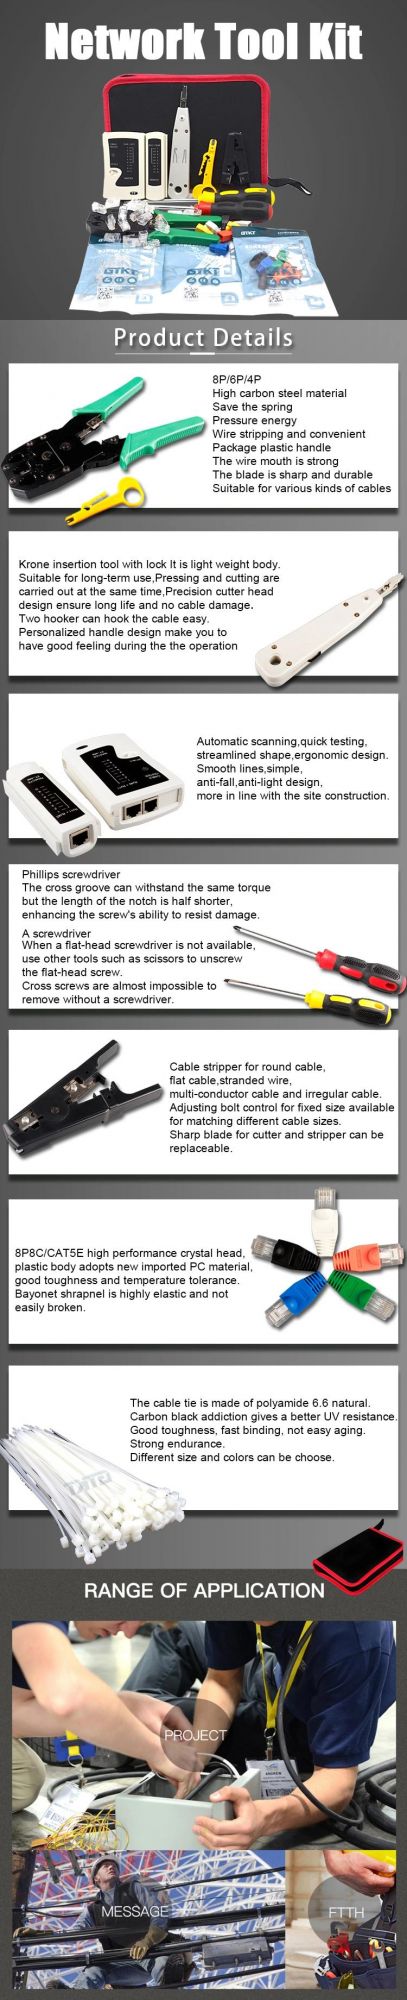 Gcabling Computer Wire Tracker Krone Insertion Tool Hand Crimping RJ45 Connector CAT6 Network Cable Kit